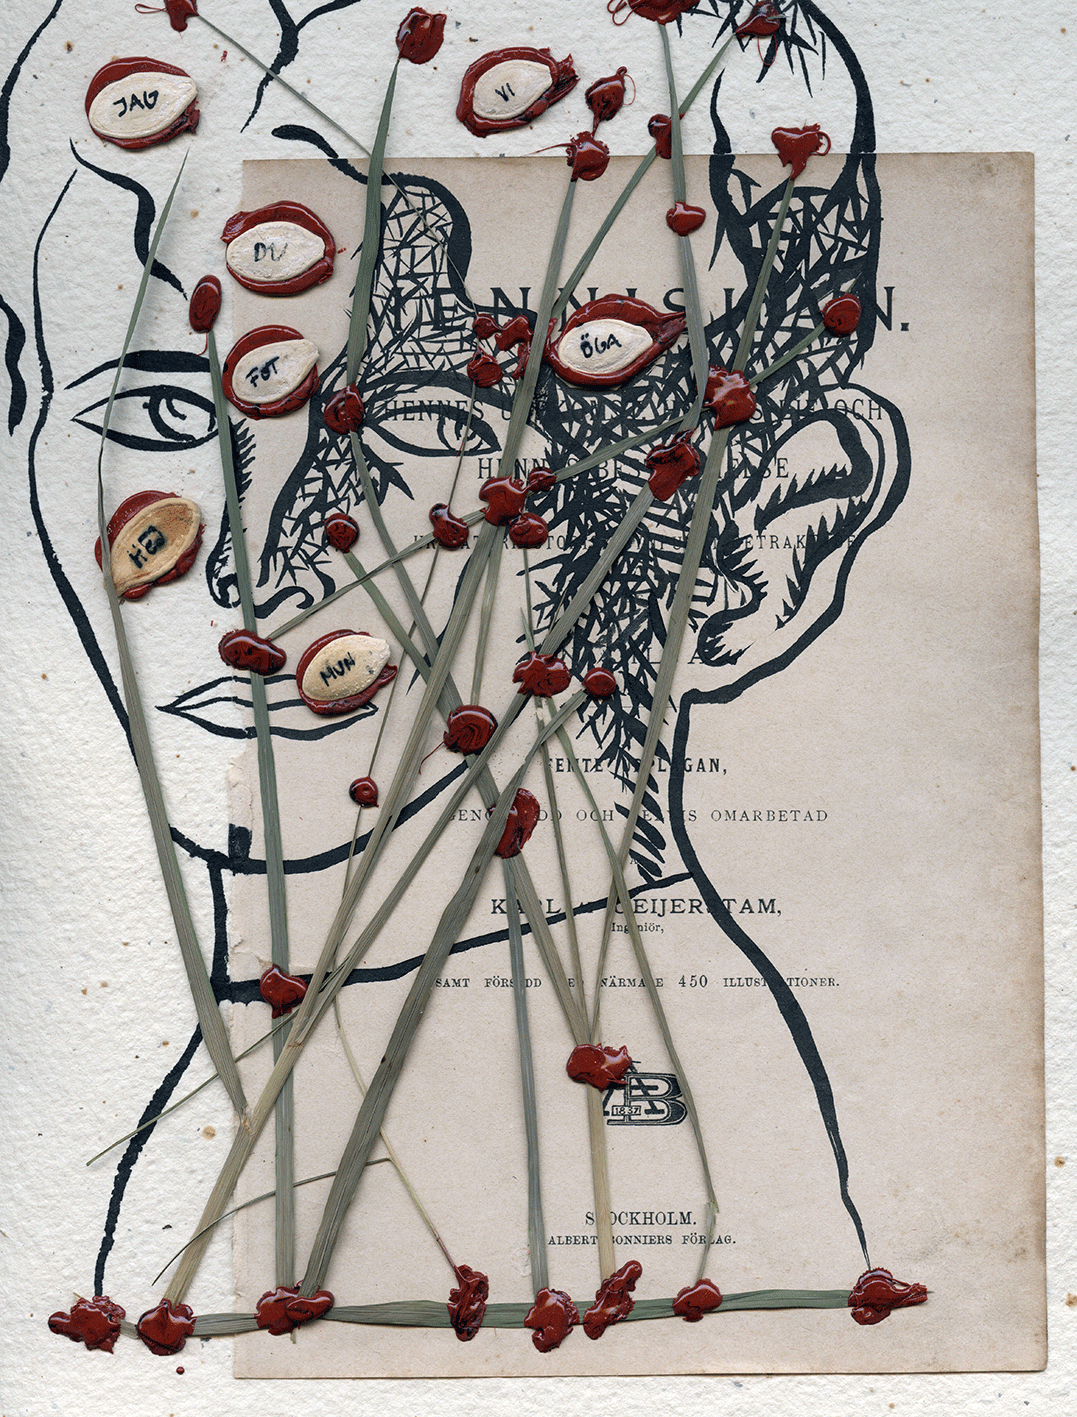 1985 Self-portrait, Ink, grass, seeds, bookpage and lack on paper